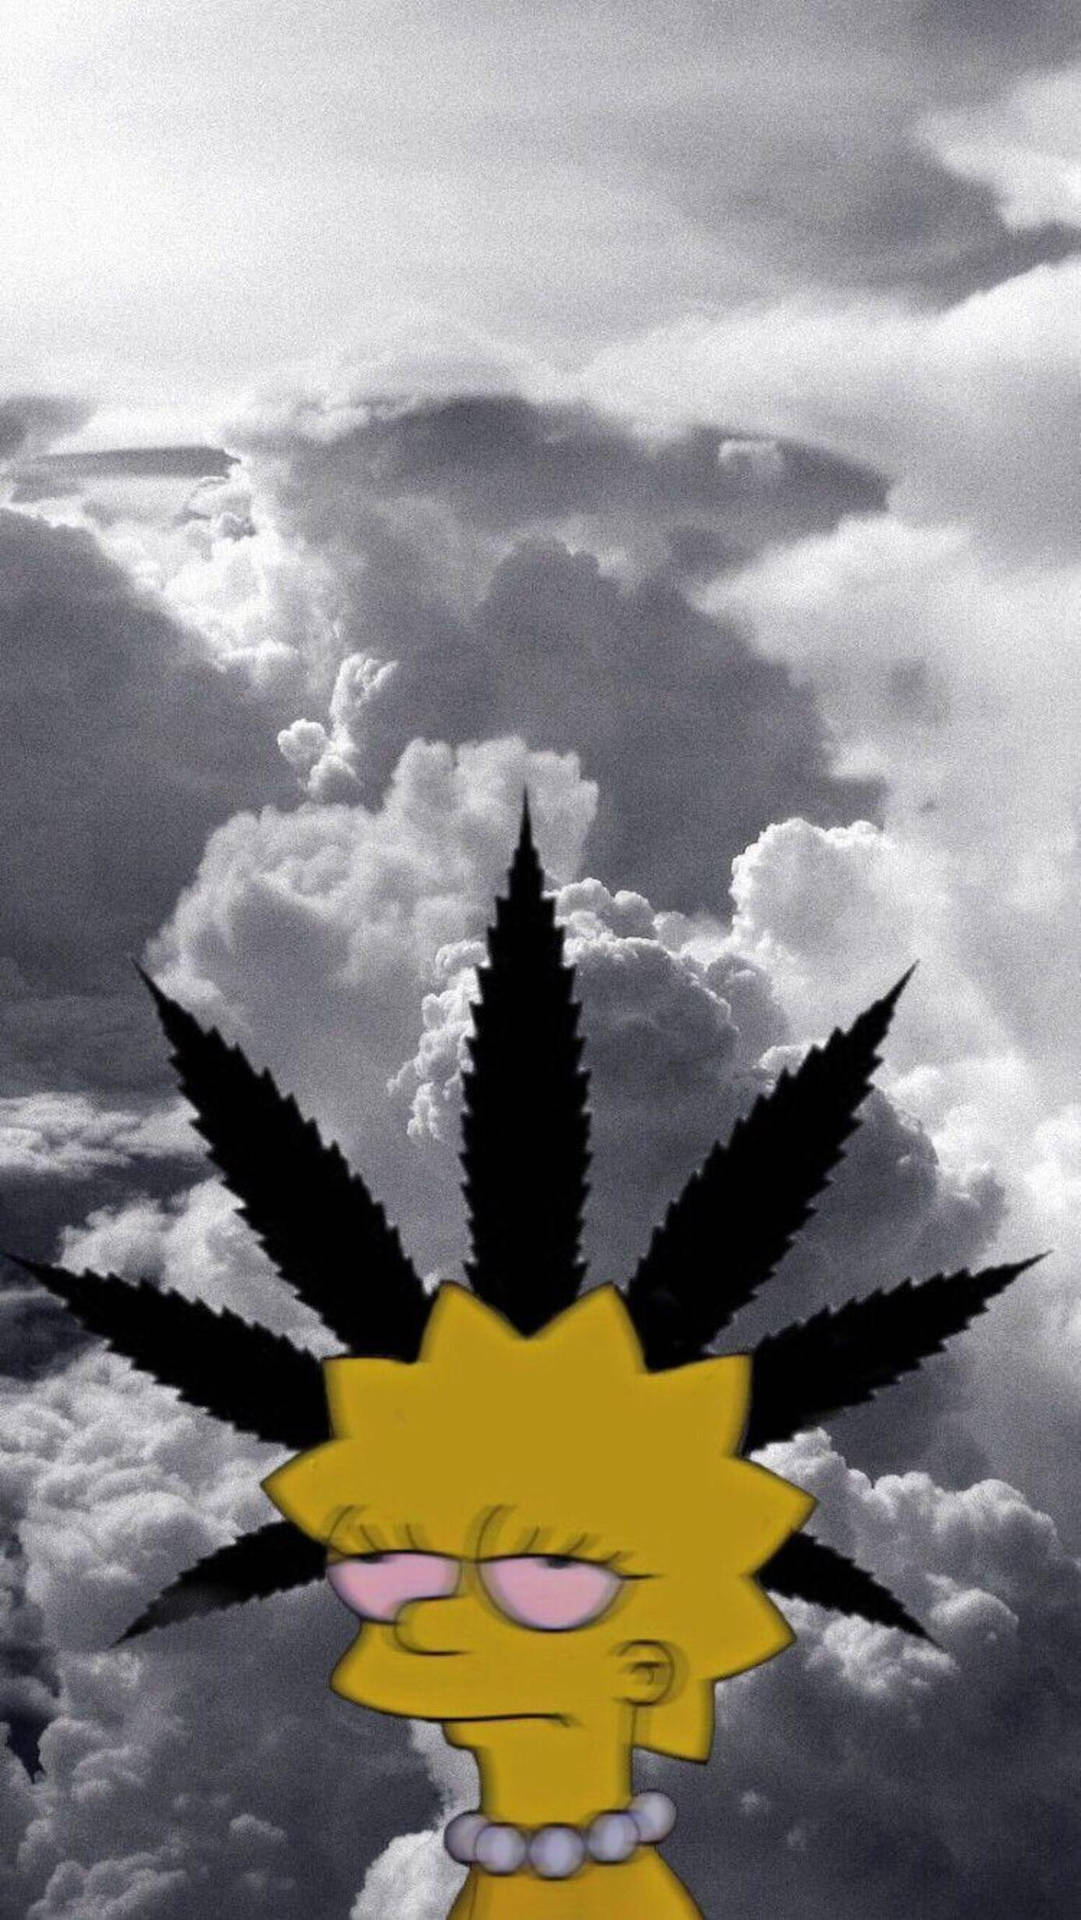 Lisasimpson Är En Stoner (this Sentence Has No Relevance Or Context In Relation To Computer Or Mobile Wallpaper) Wallpaper